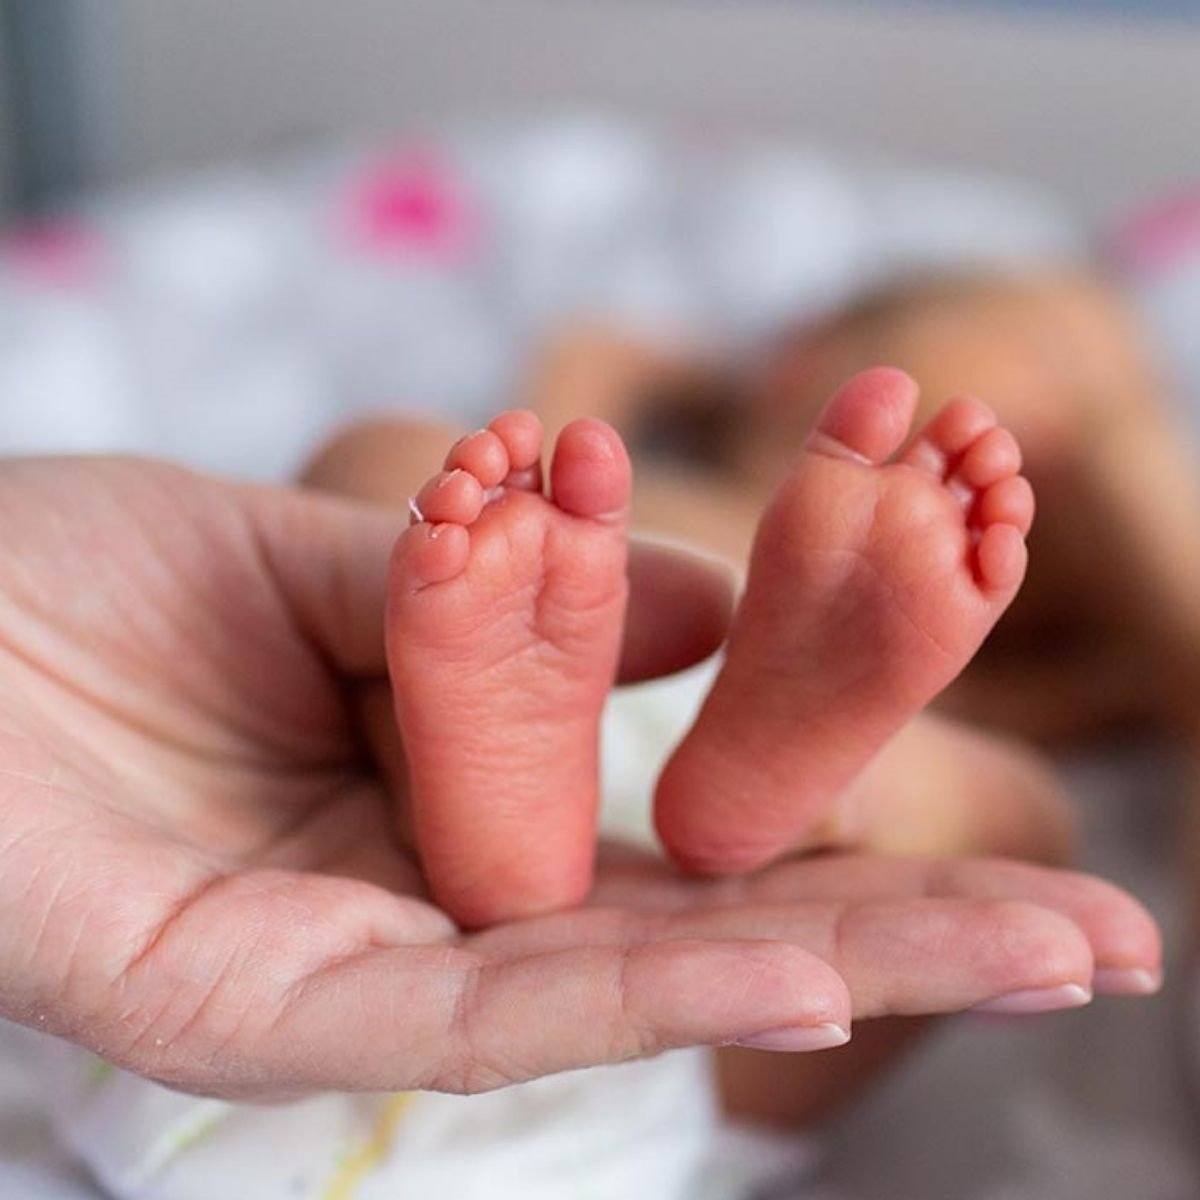 Worried About Your Premature Baby? Here’s How to Cope